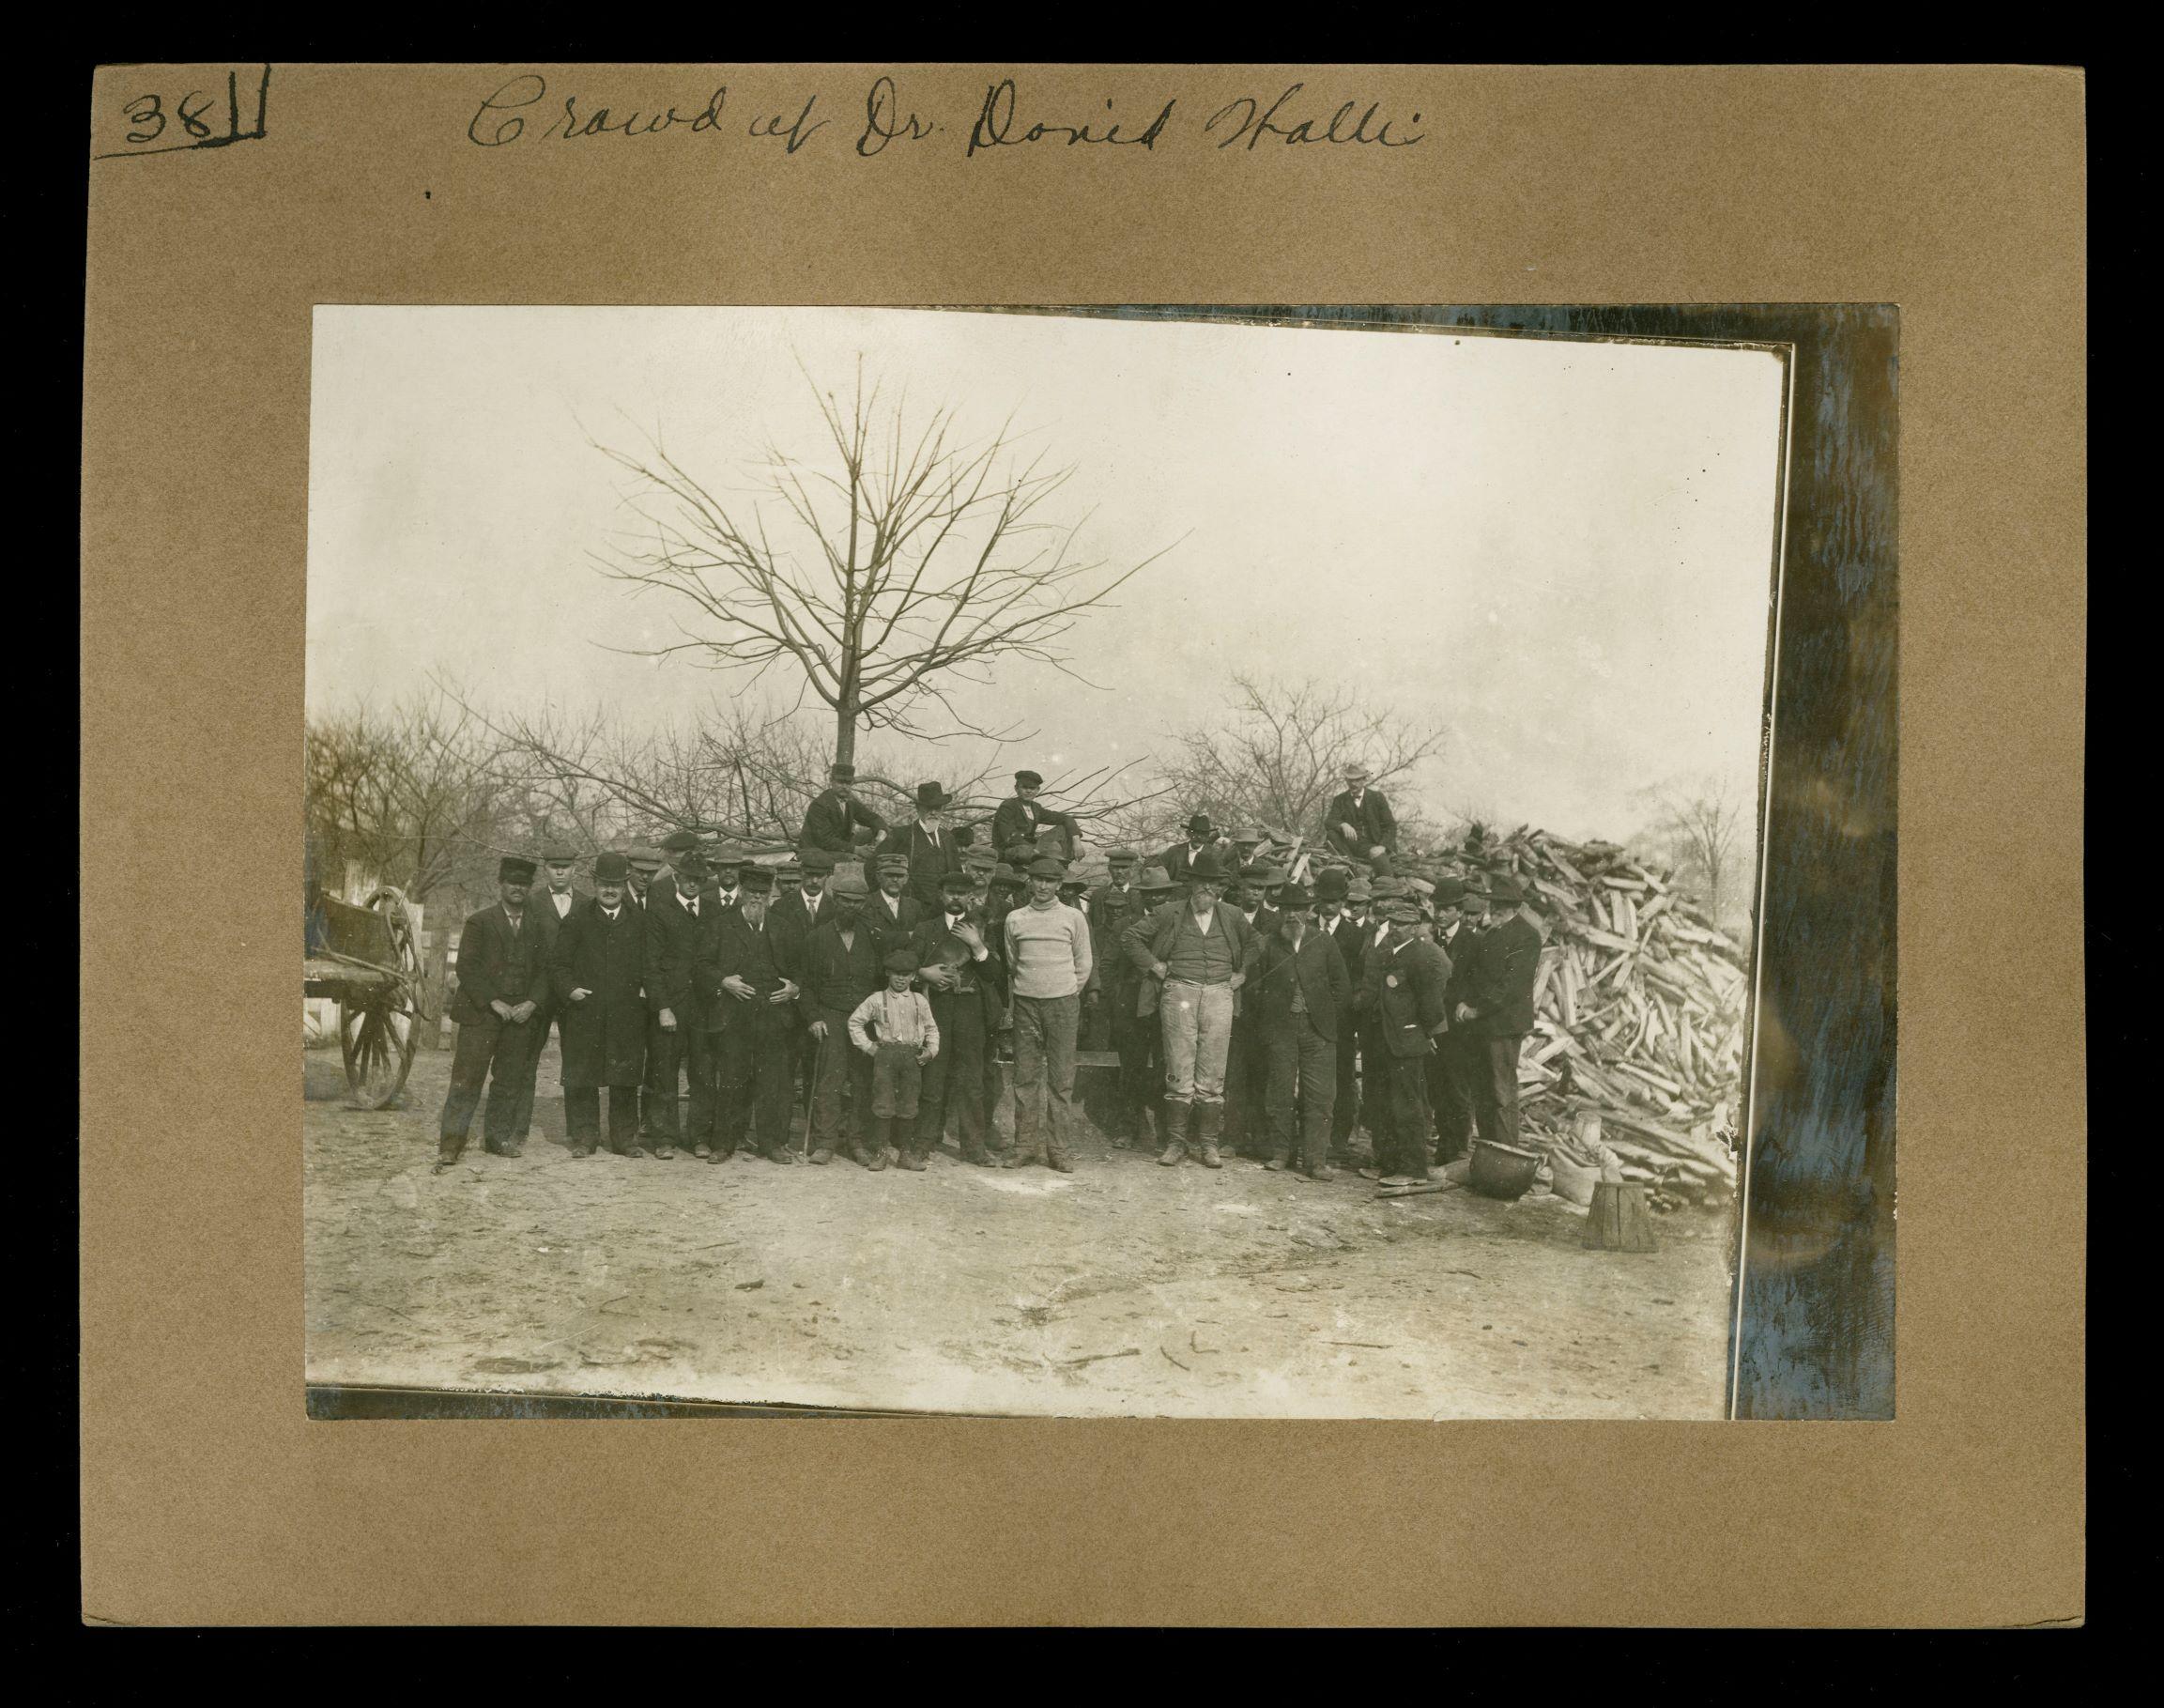 crowd of people posing for photo during a spraying demonstration; middle row depicts Black men in attendance